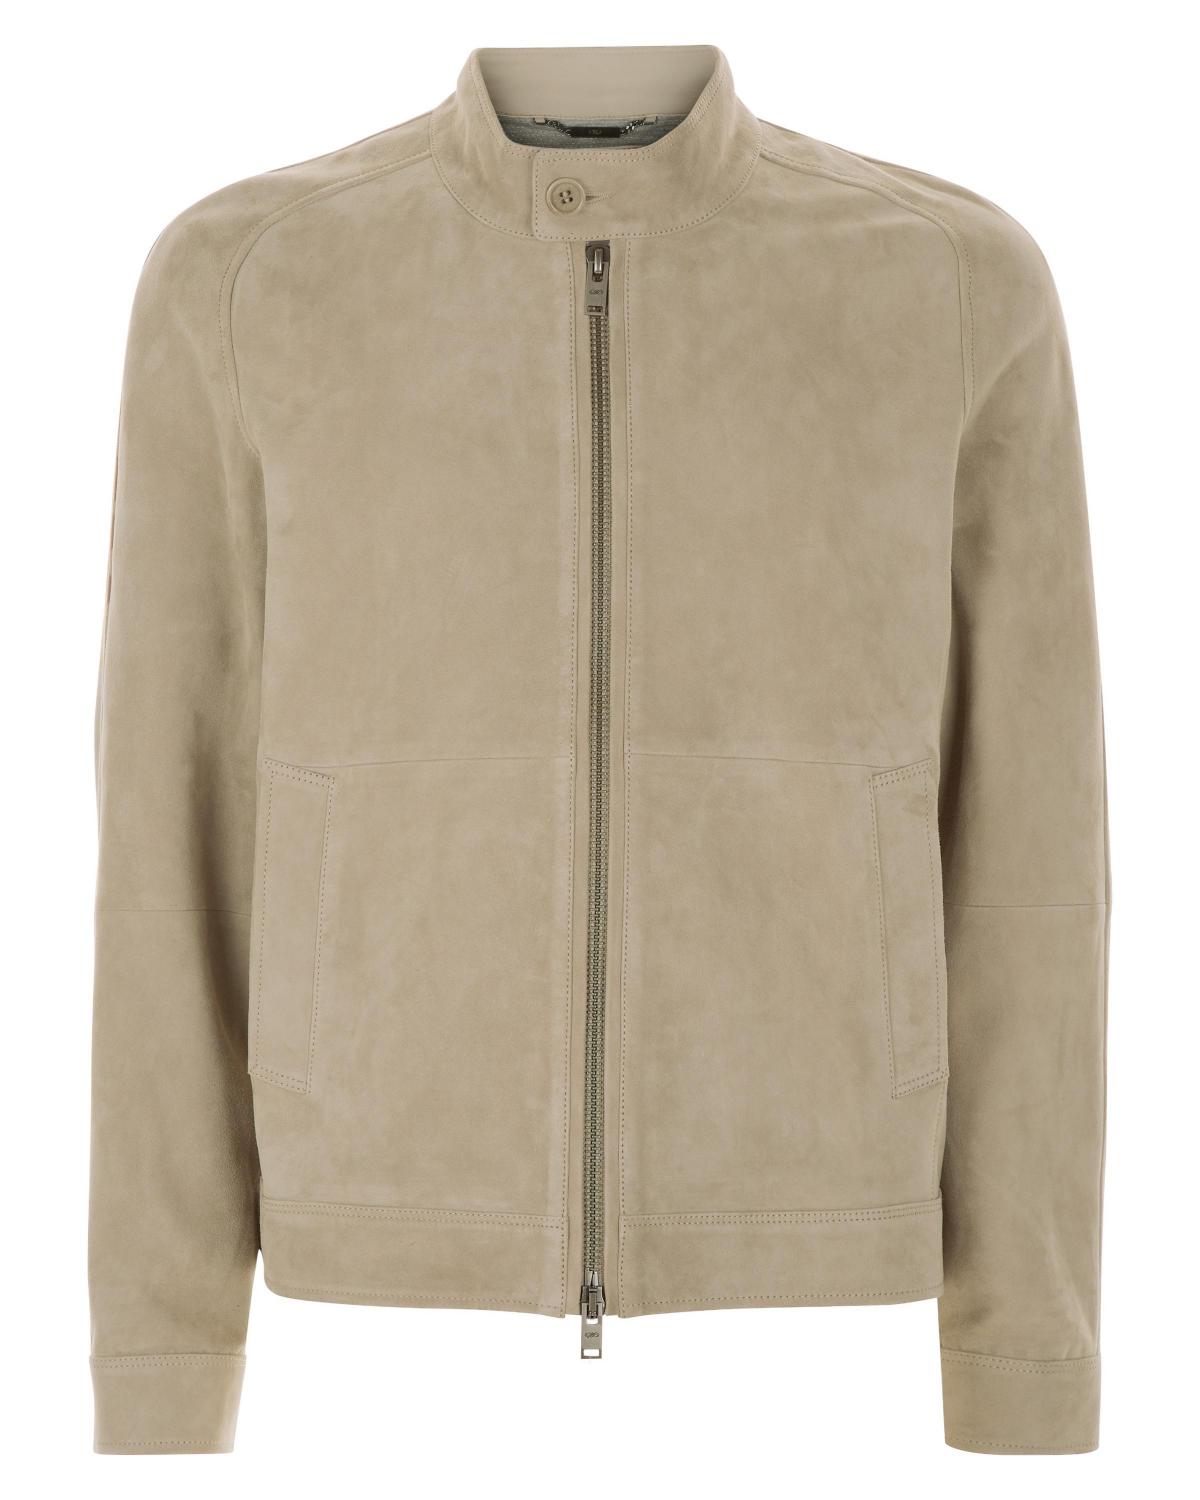 Jaeger, Suede Jacket with Leather Facing, £375